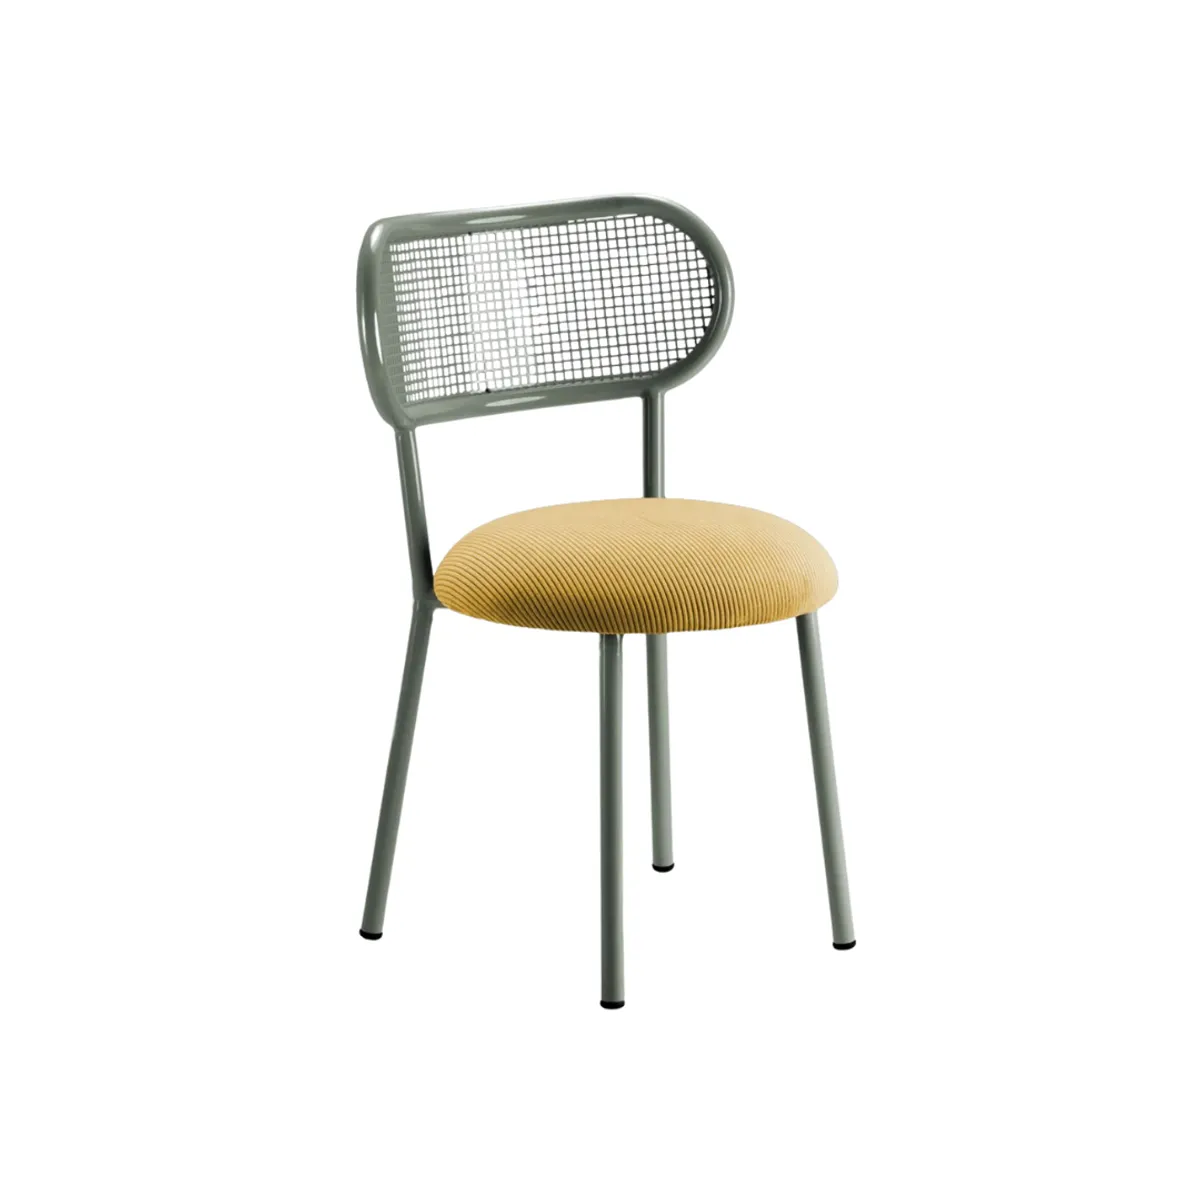 Emory side chair 2